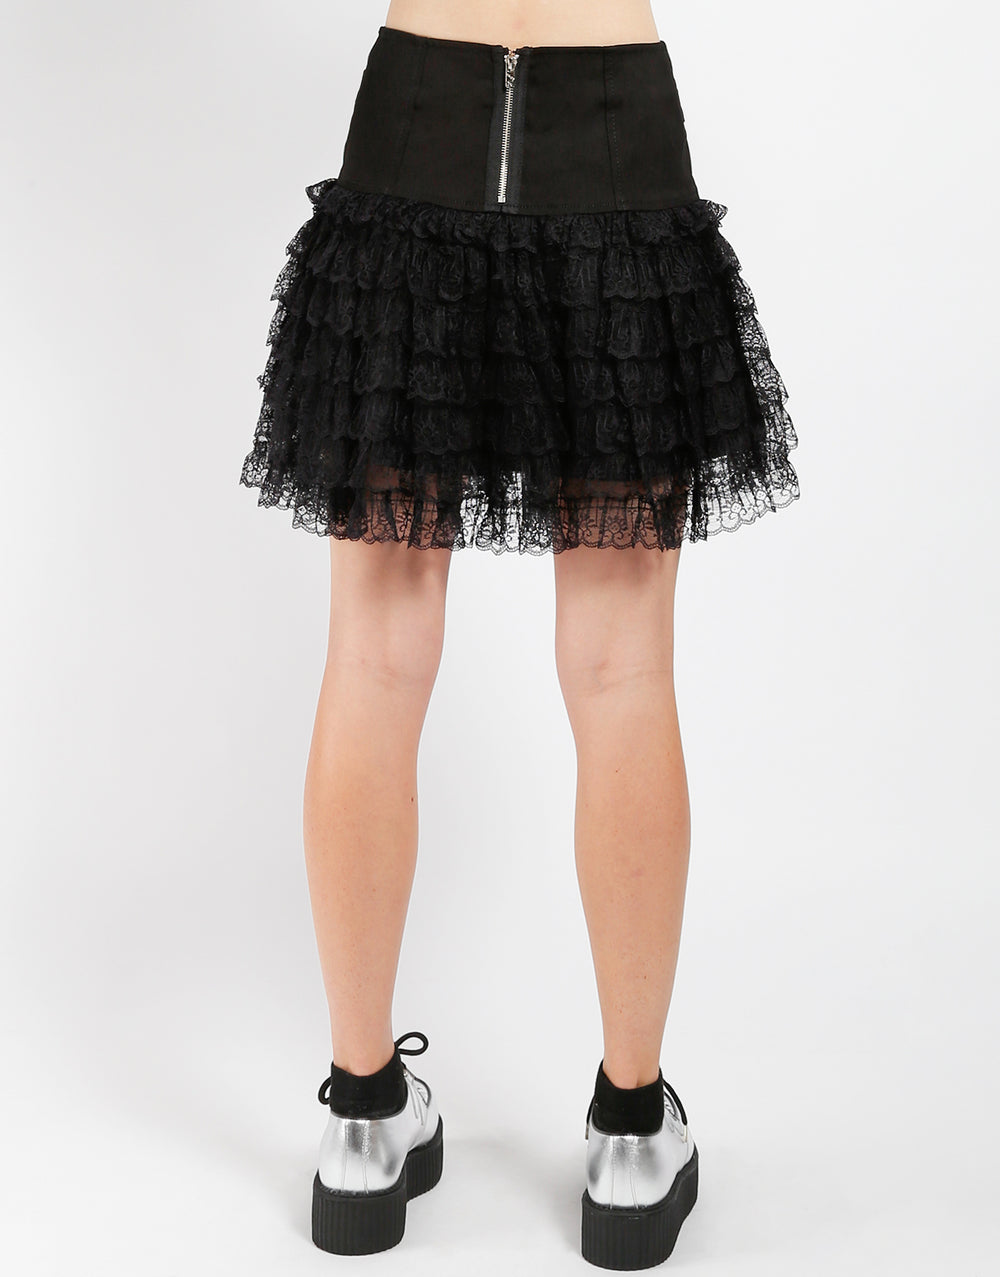 LACE TO LACE SKIRT